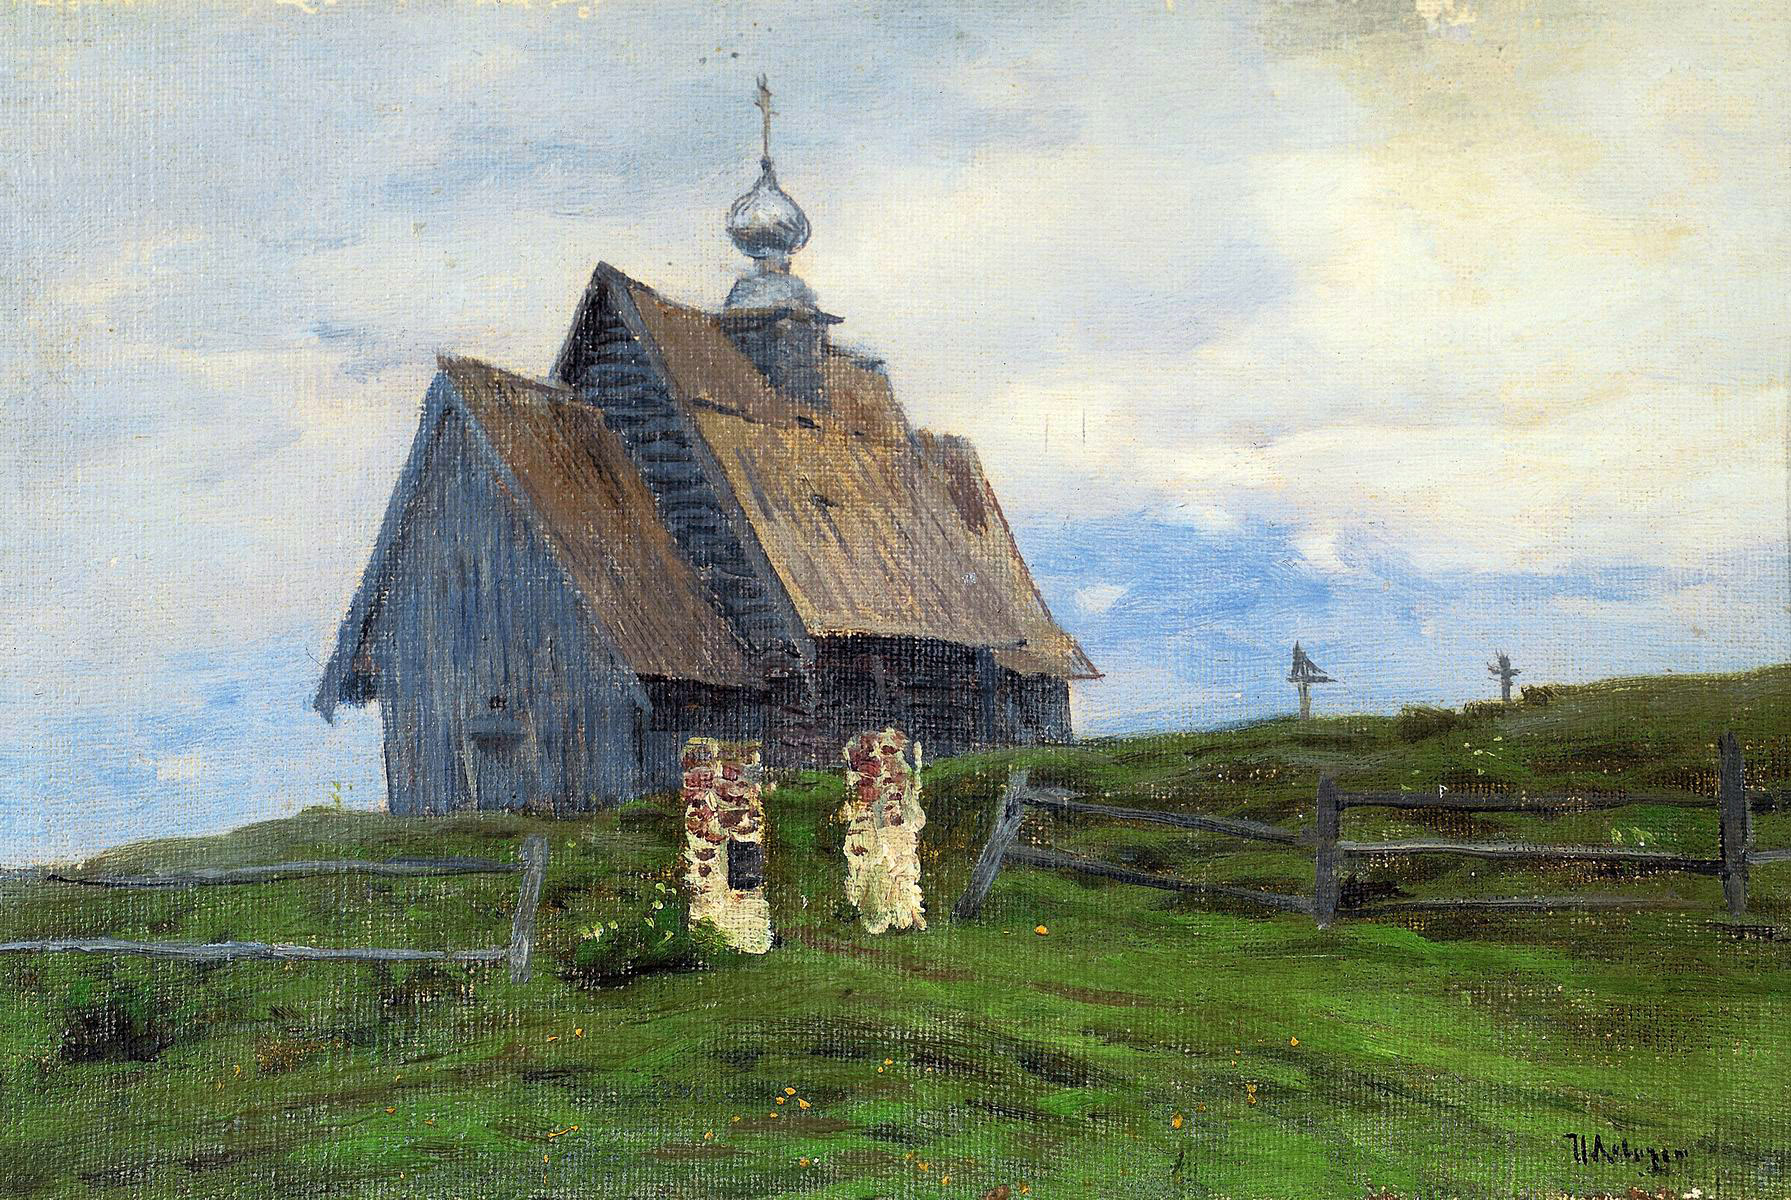 Wooden church in Plyos at the last rays of the sun. Isaac Levitan, 1888. This is what the house of Sergius of Radonezh should have looked like.